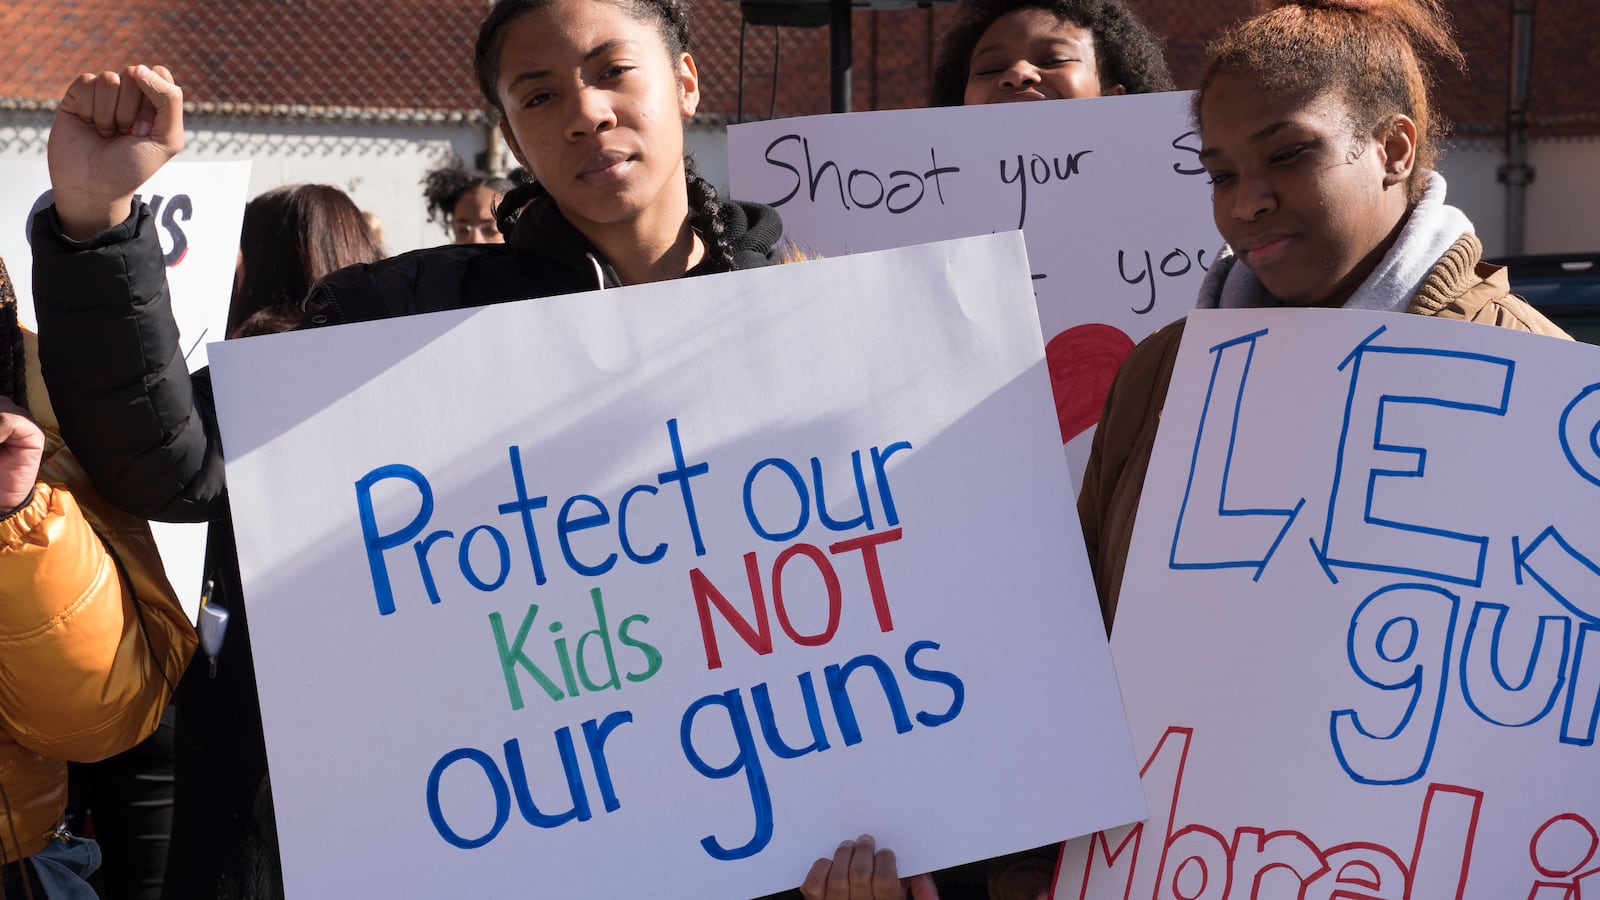 About 1,300 KIPP NYC students participated in the national school walkout a month after the Parkland, Florida shooting at Marjory Stoneman Douglas High.